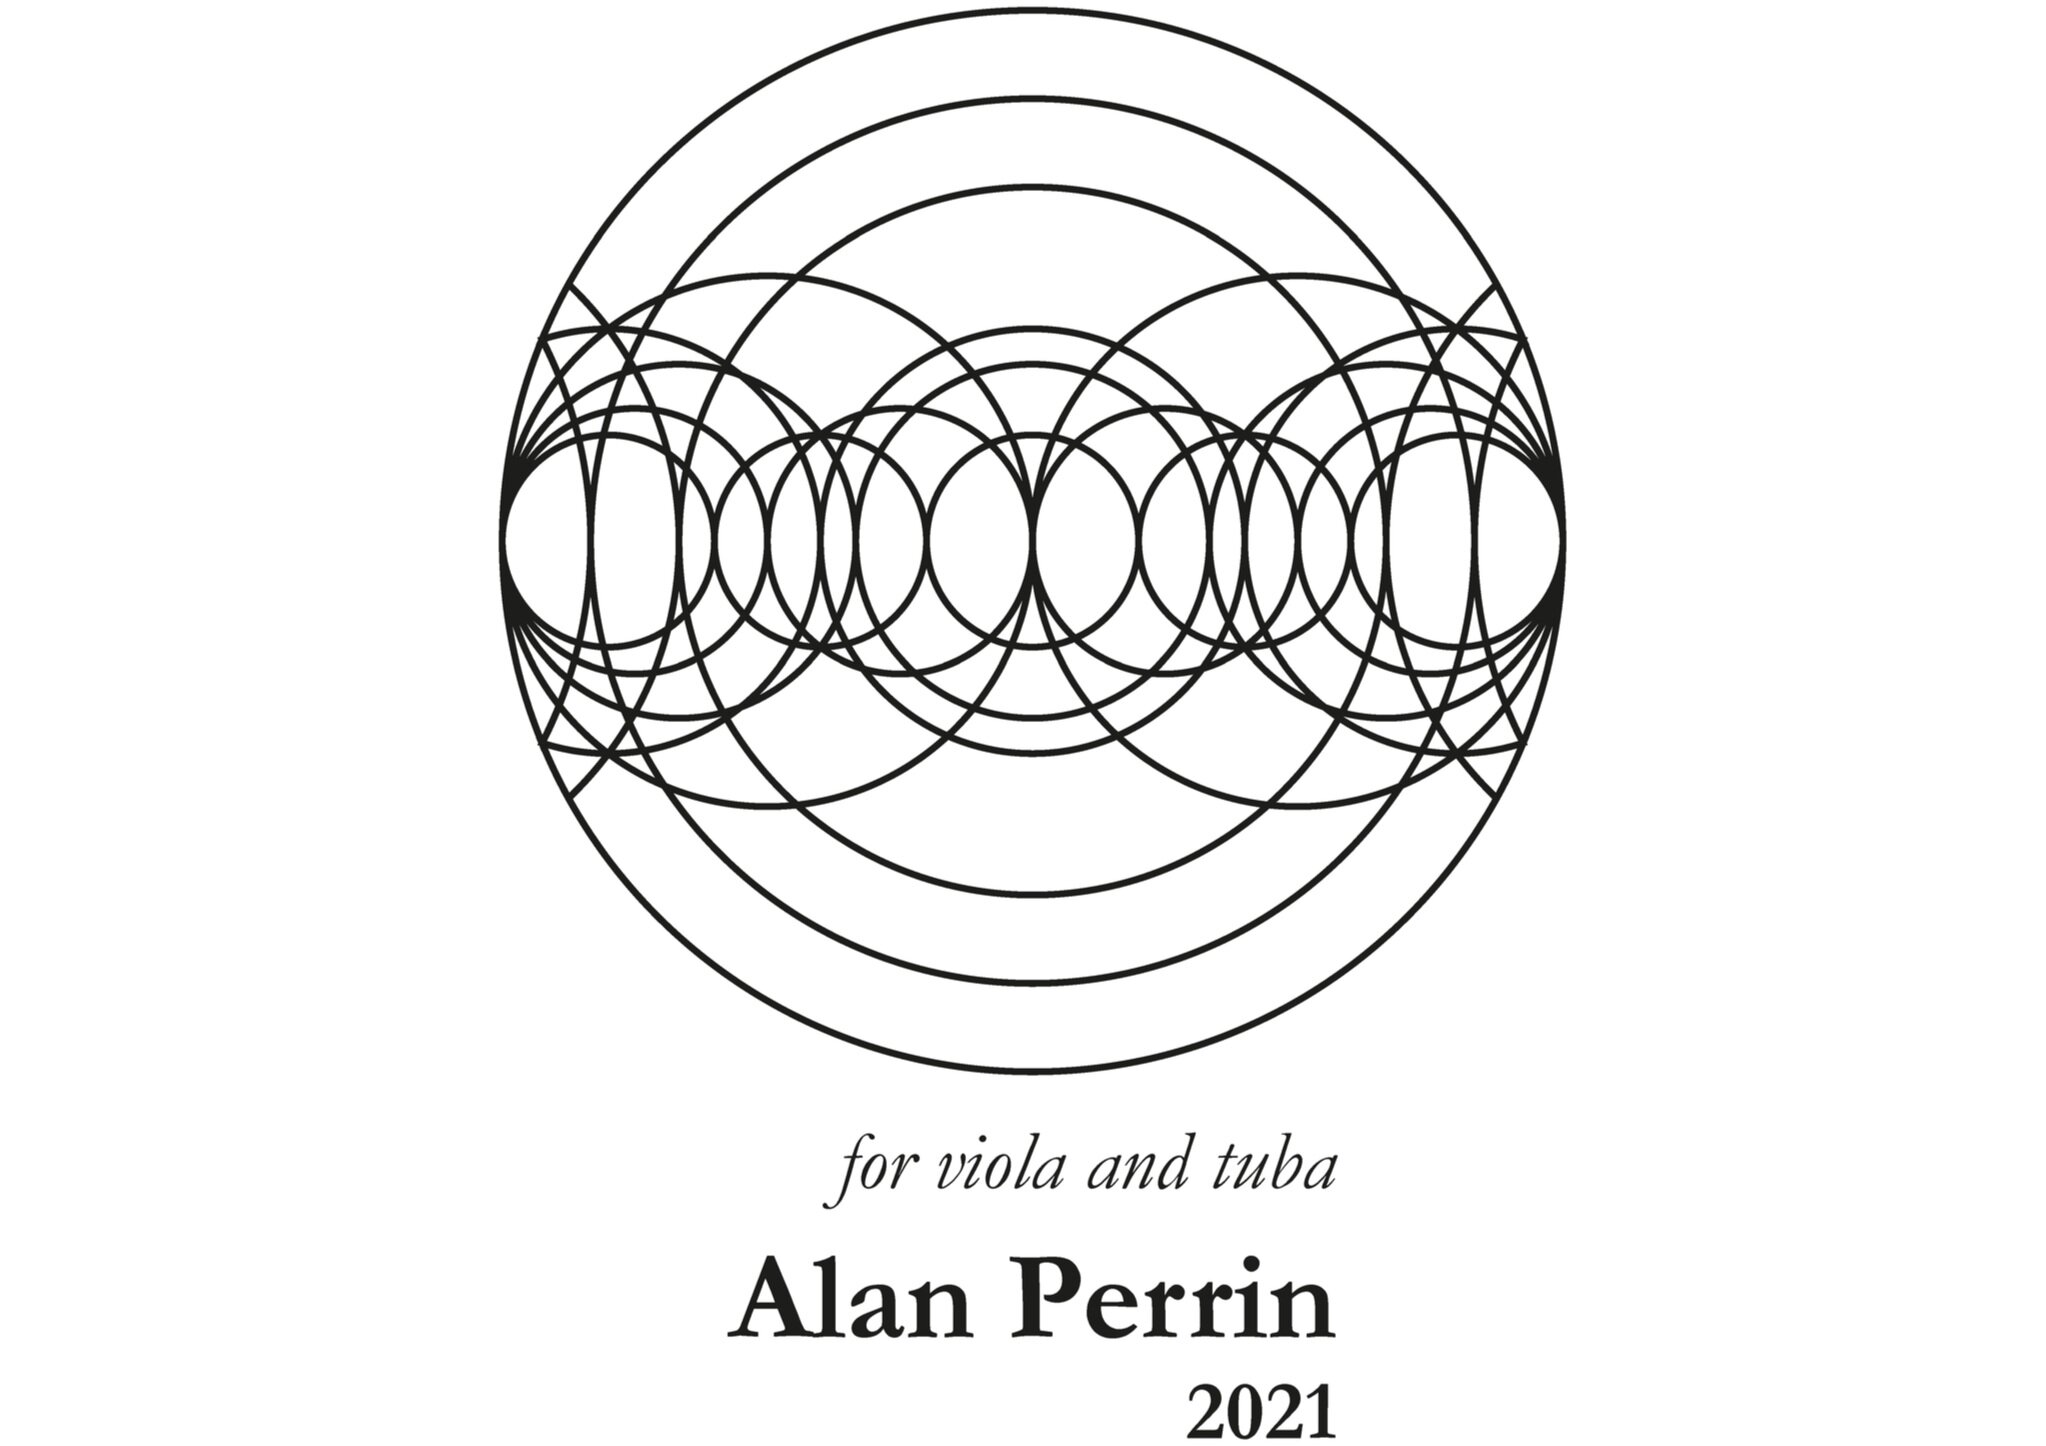 Pages+from+Circles+into+time_With+Fixes.pdf.jpg